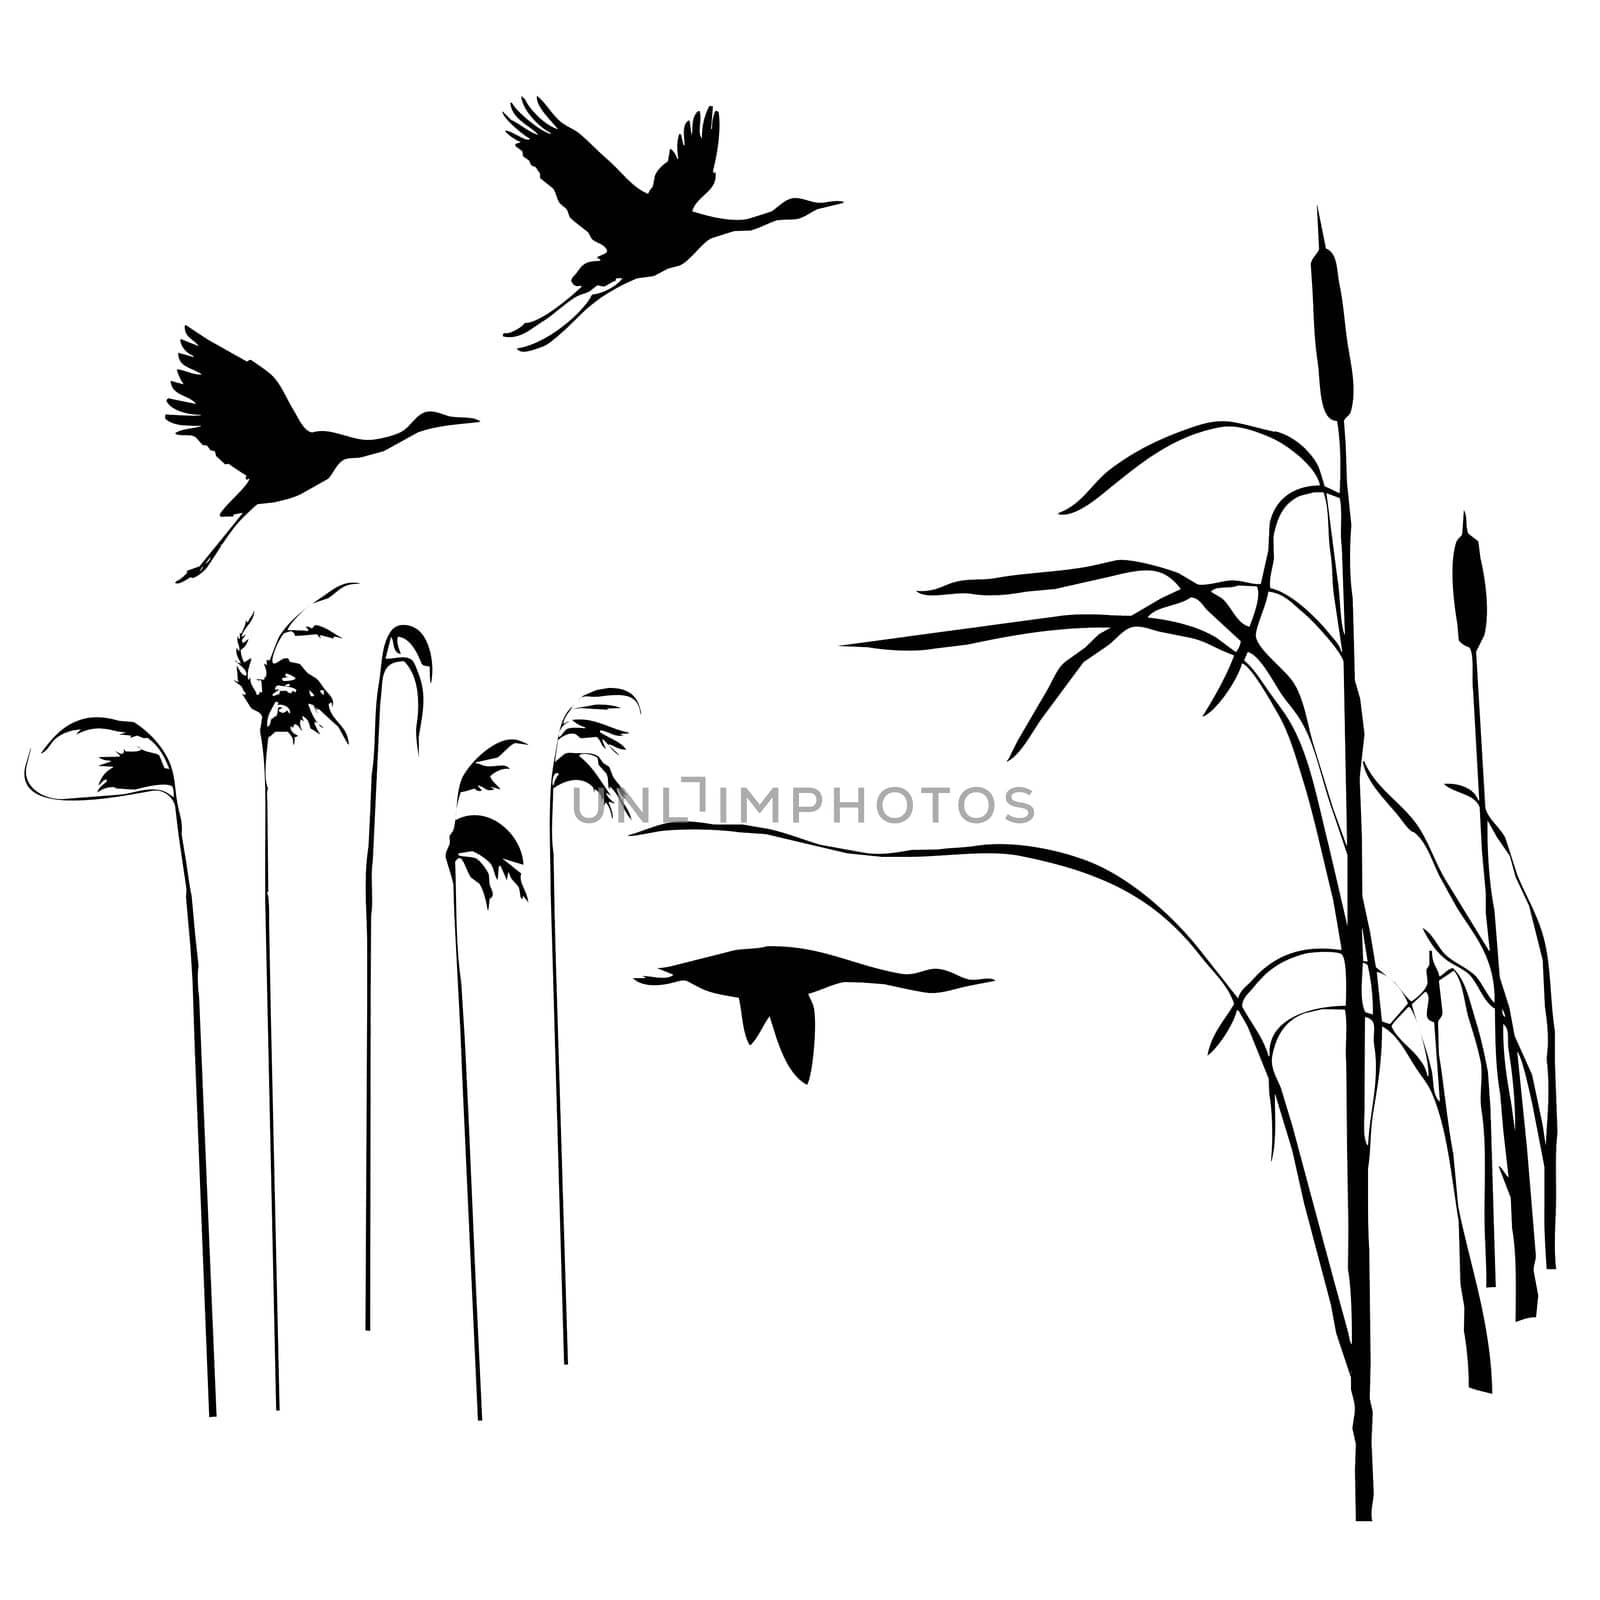 silhouette of the birds on lake